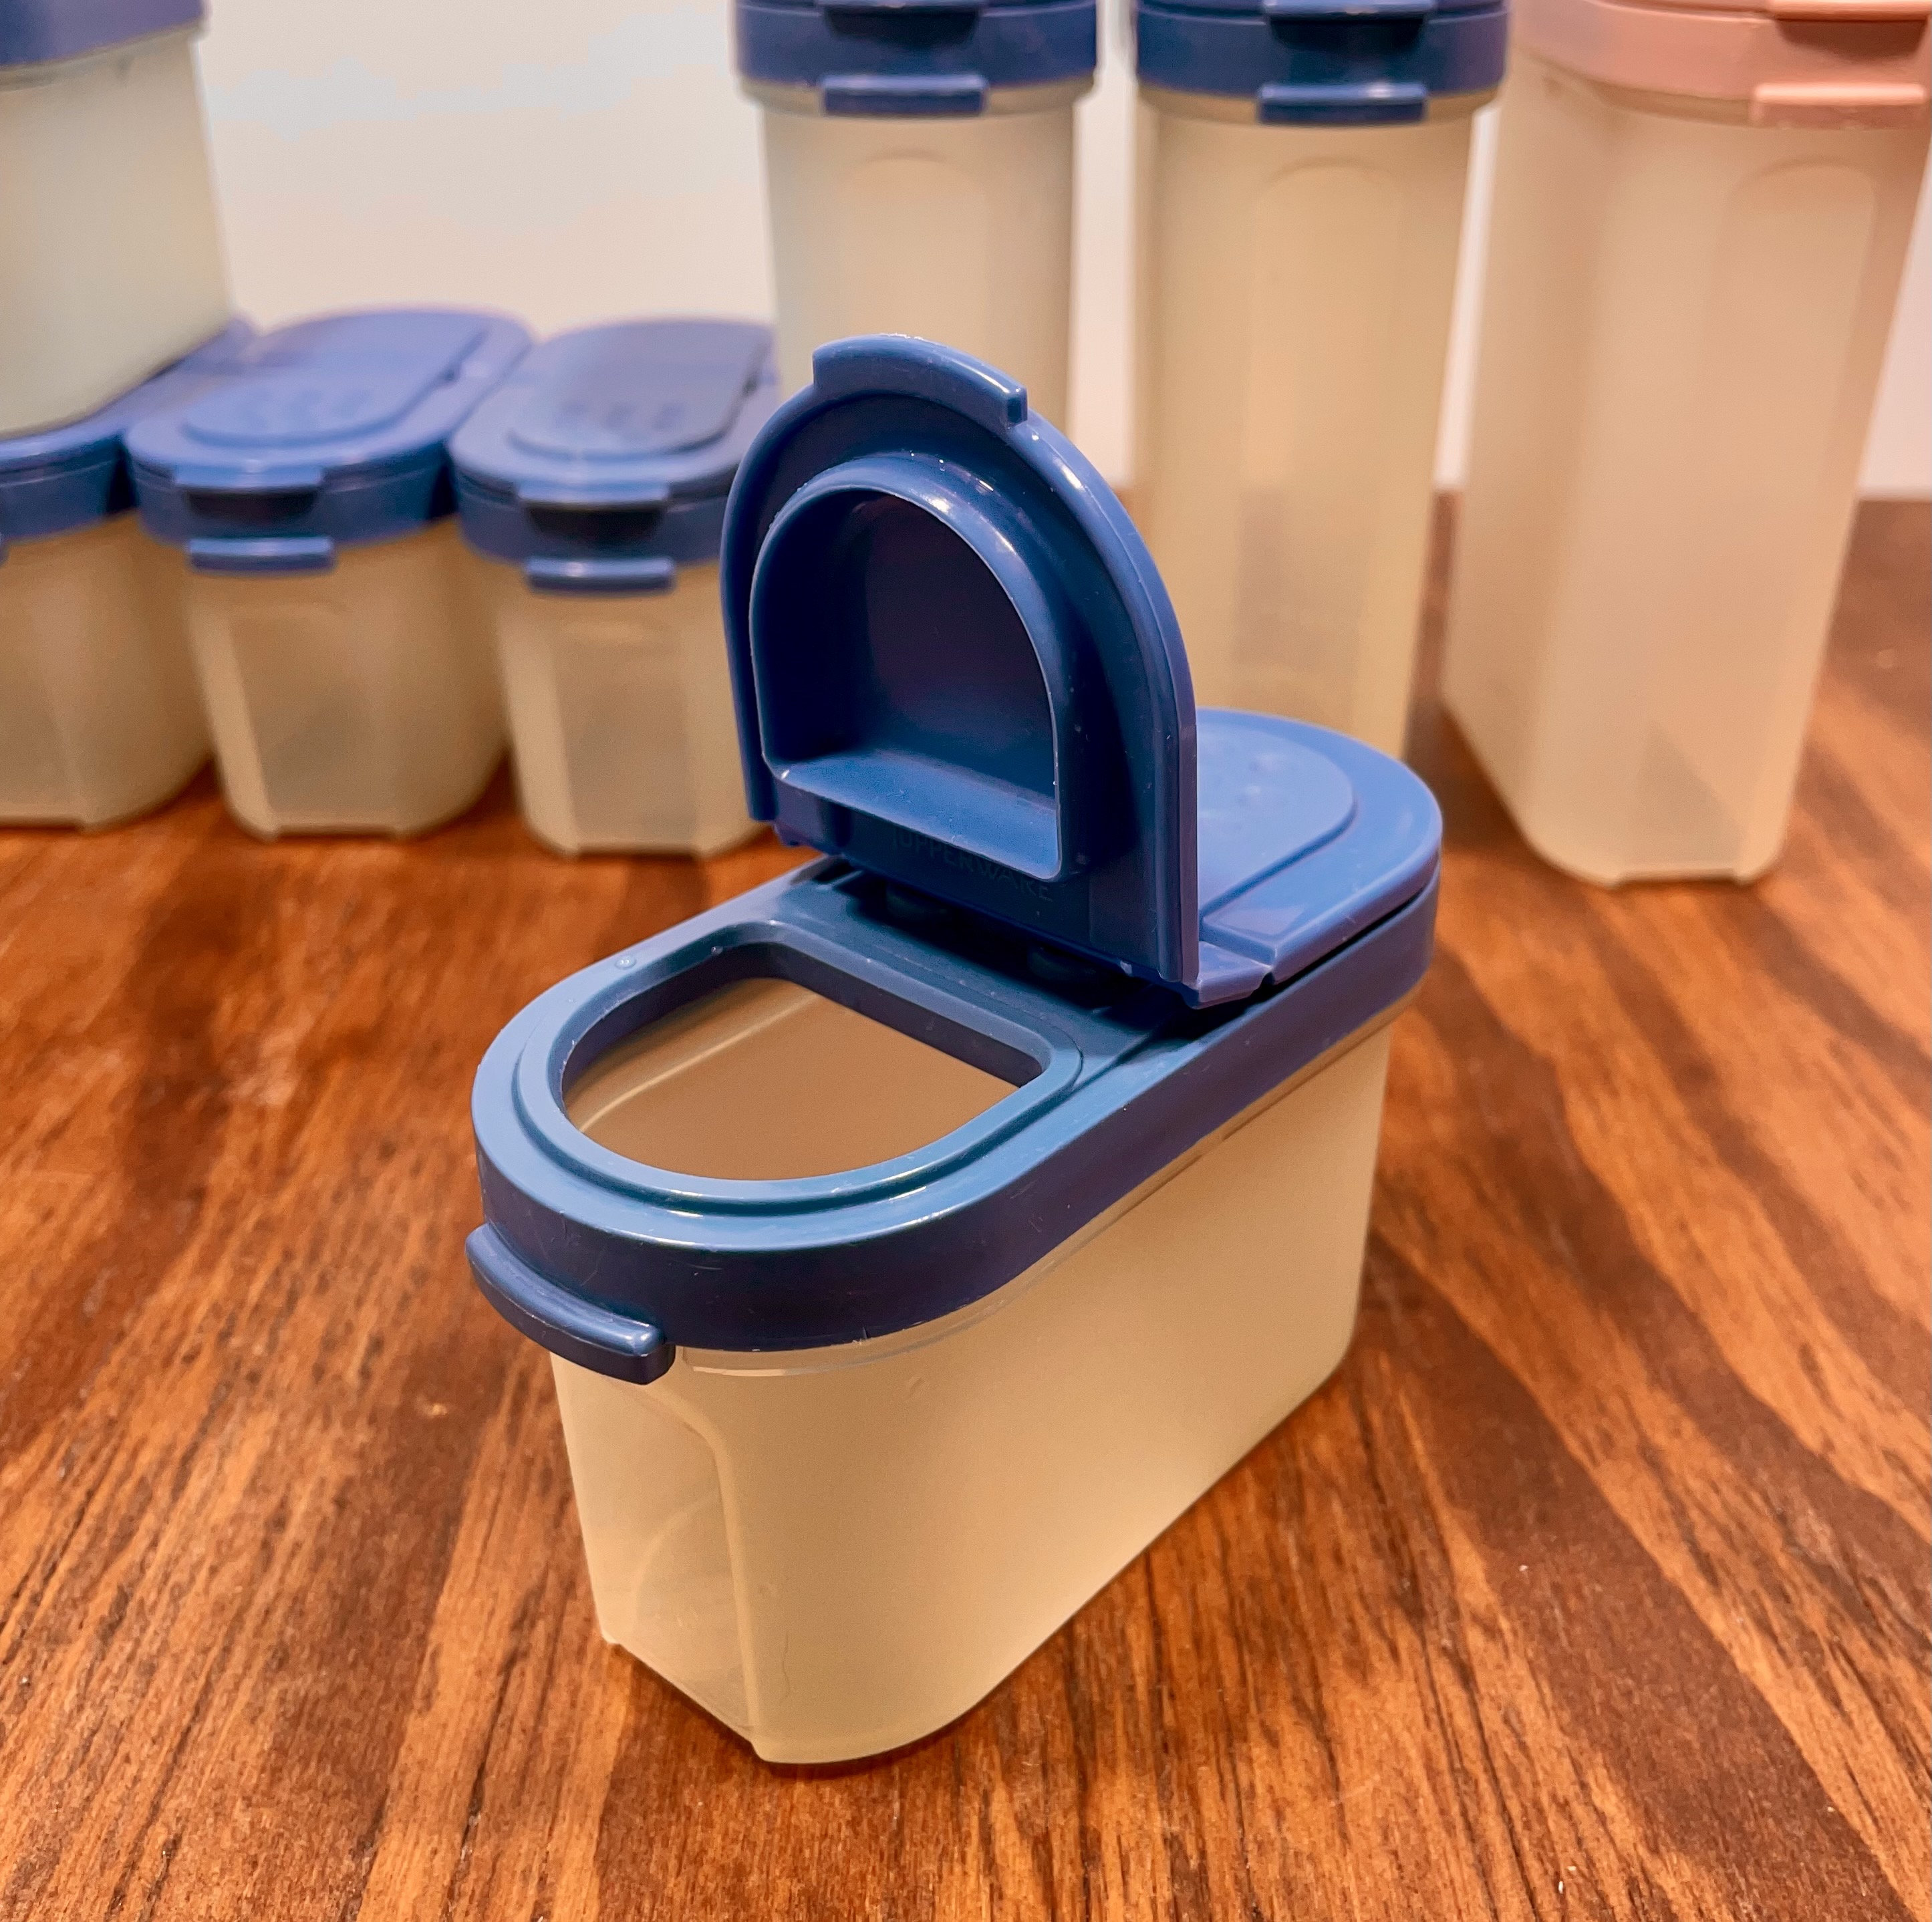 Tupperware Modular Mates Spice Carousel With 12 Shakers 1980s Kitchen  Organization Stackable Pantry Storage Clear Blue 